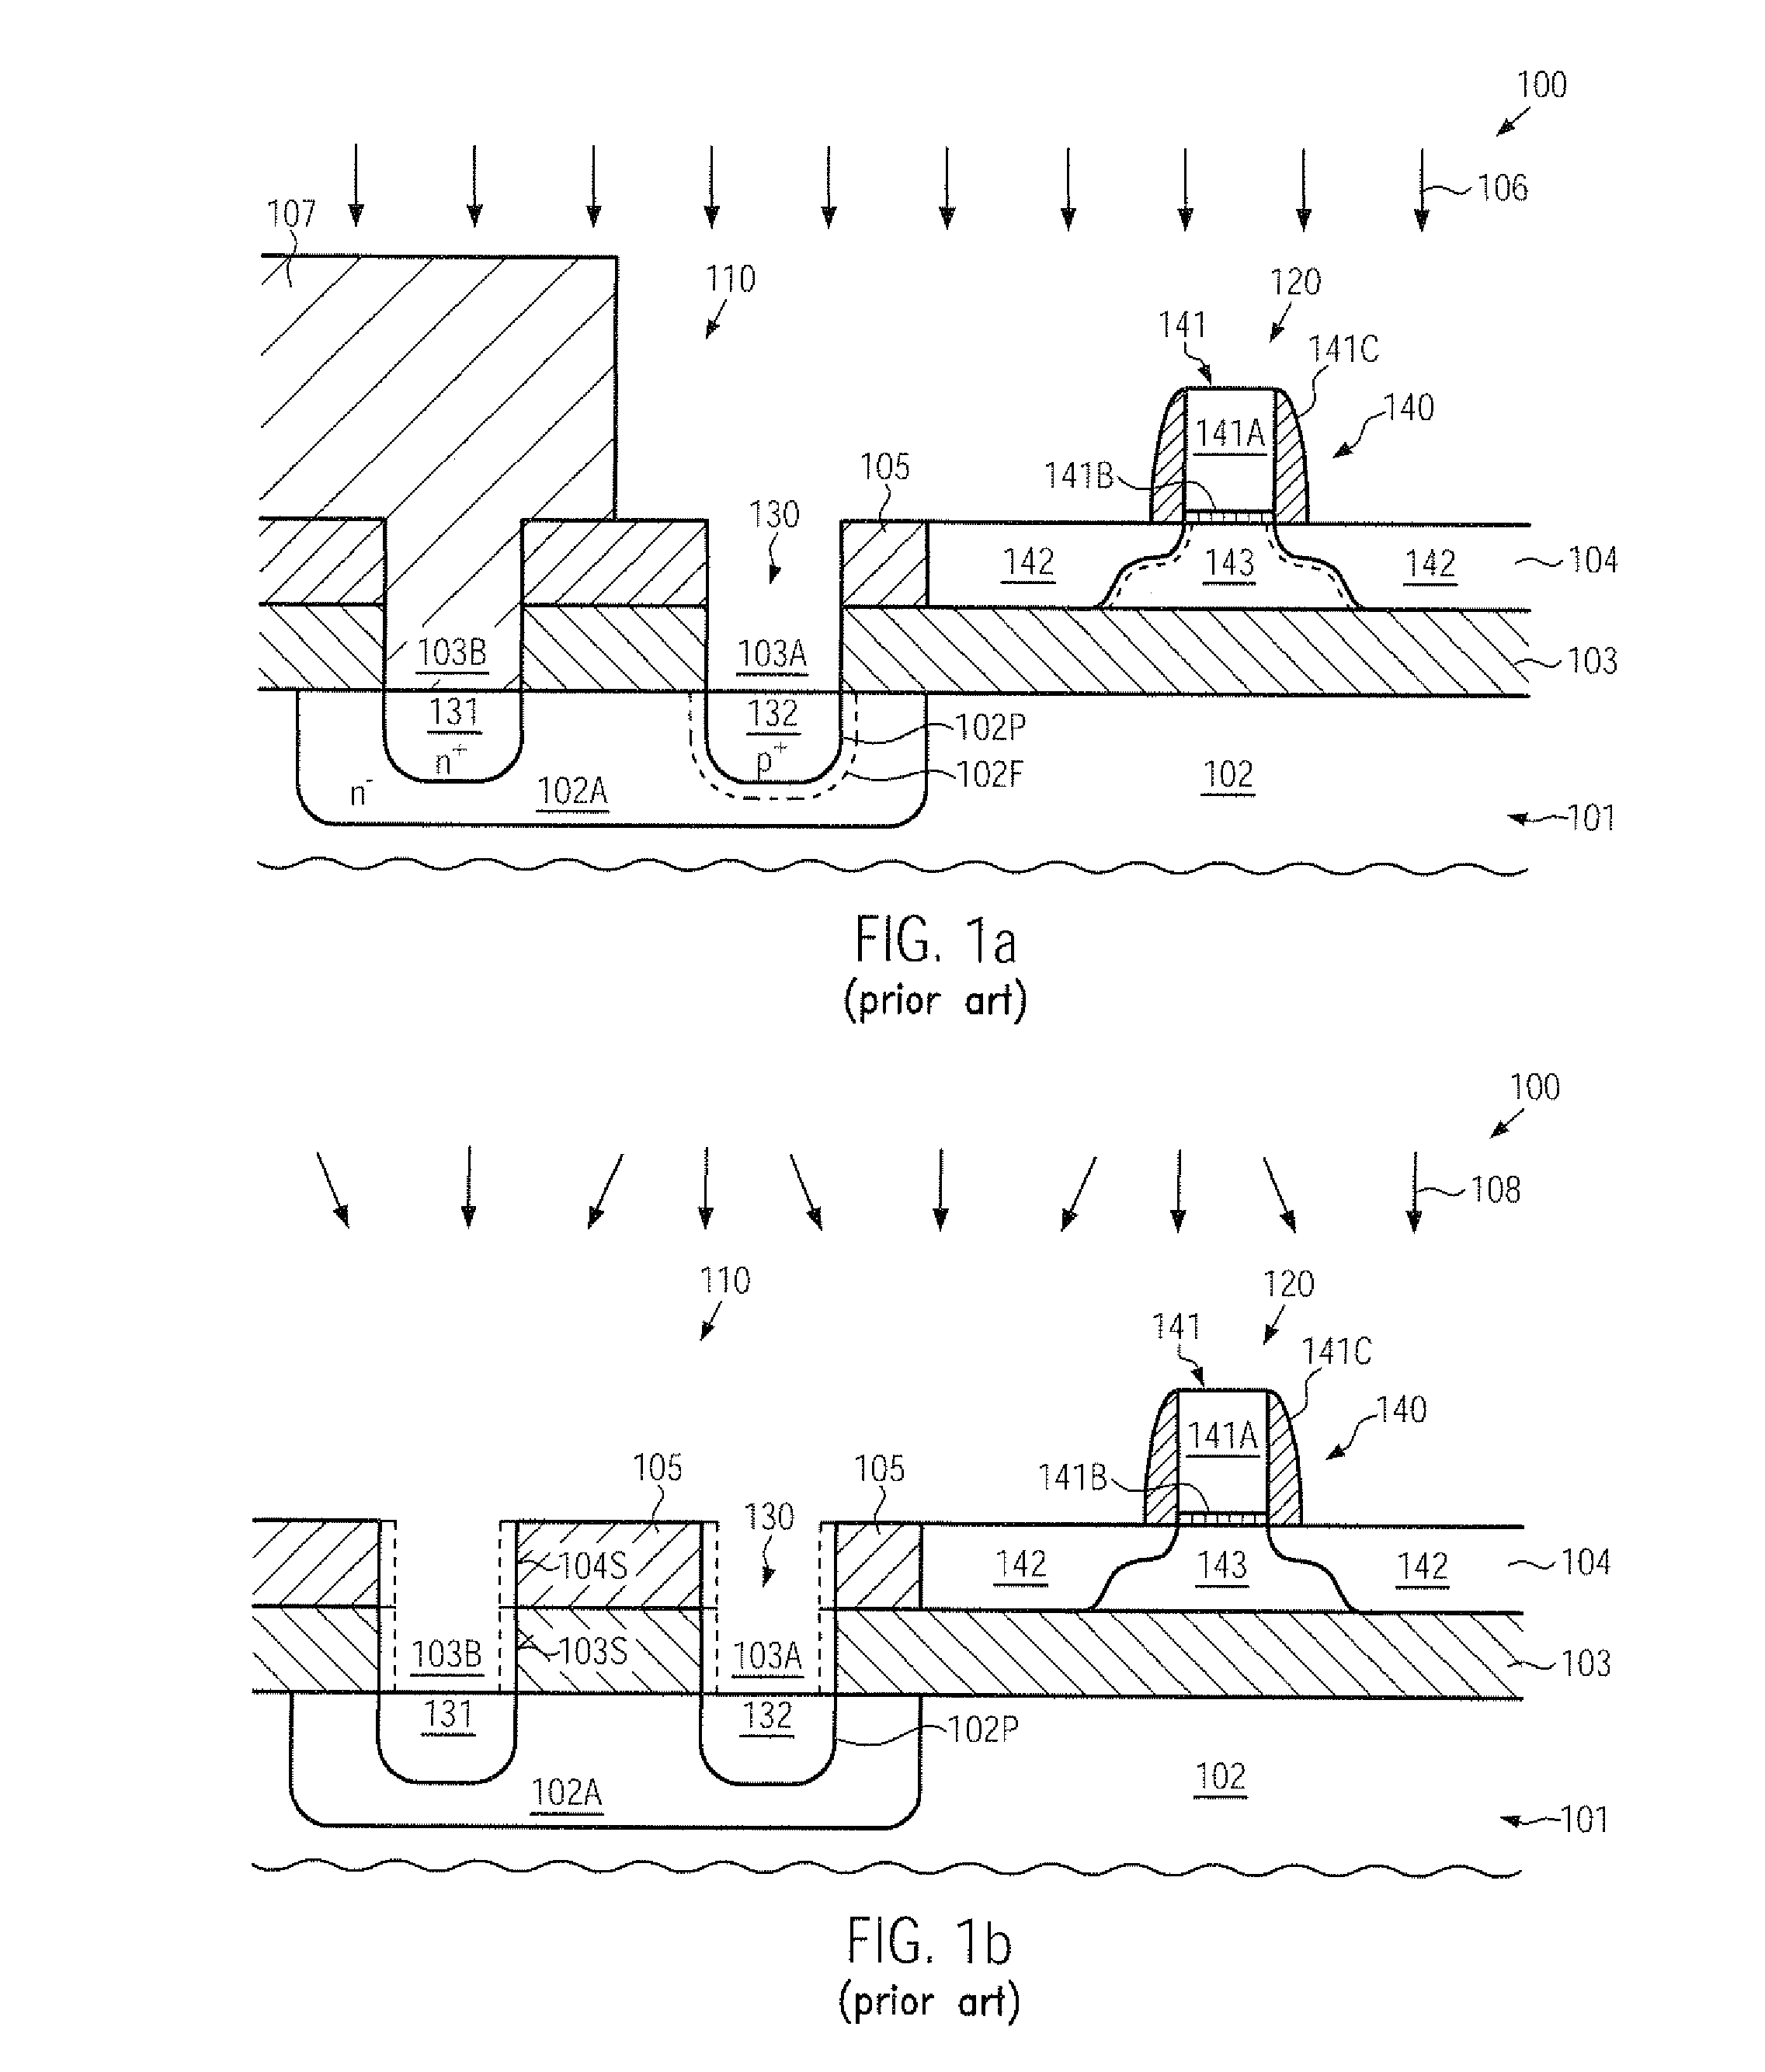 Semiconductor element formed in a crystalline substrate material and comprising an embedded in situ doped semiconductor material